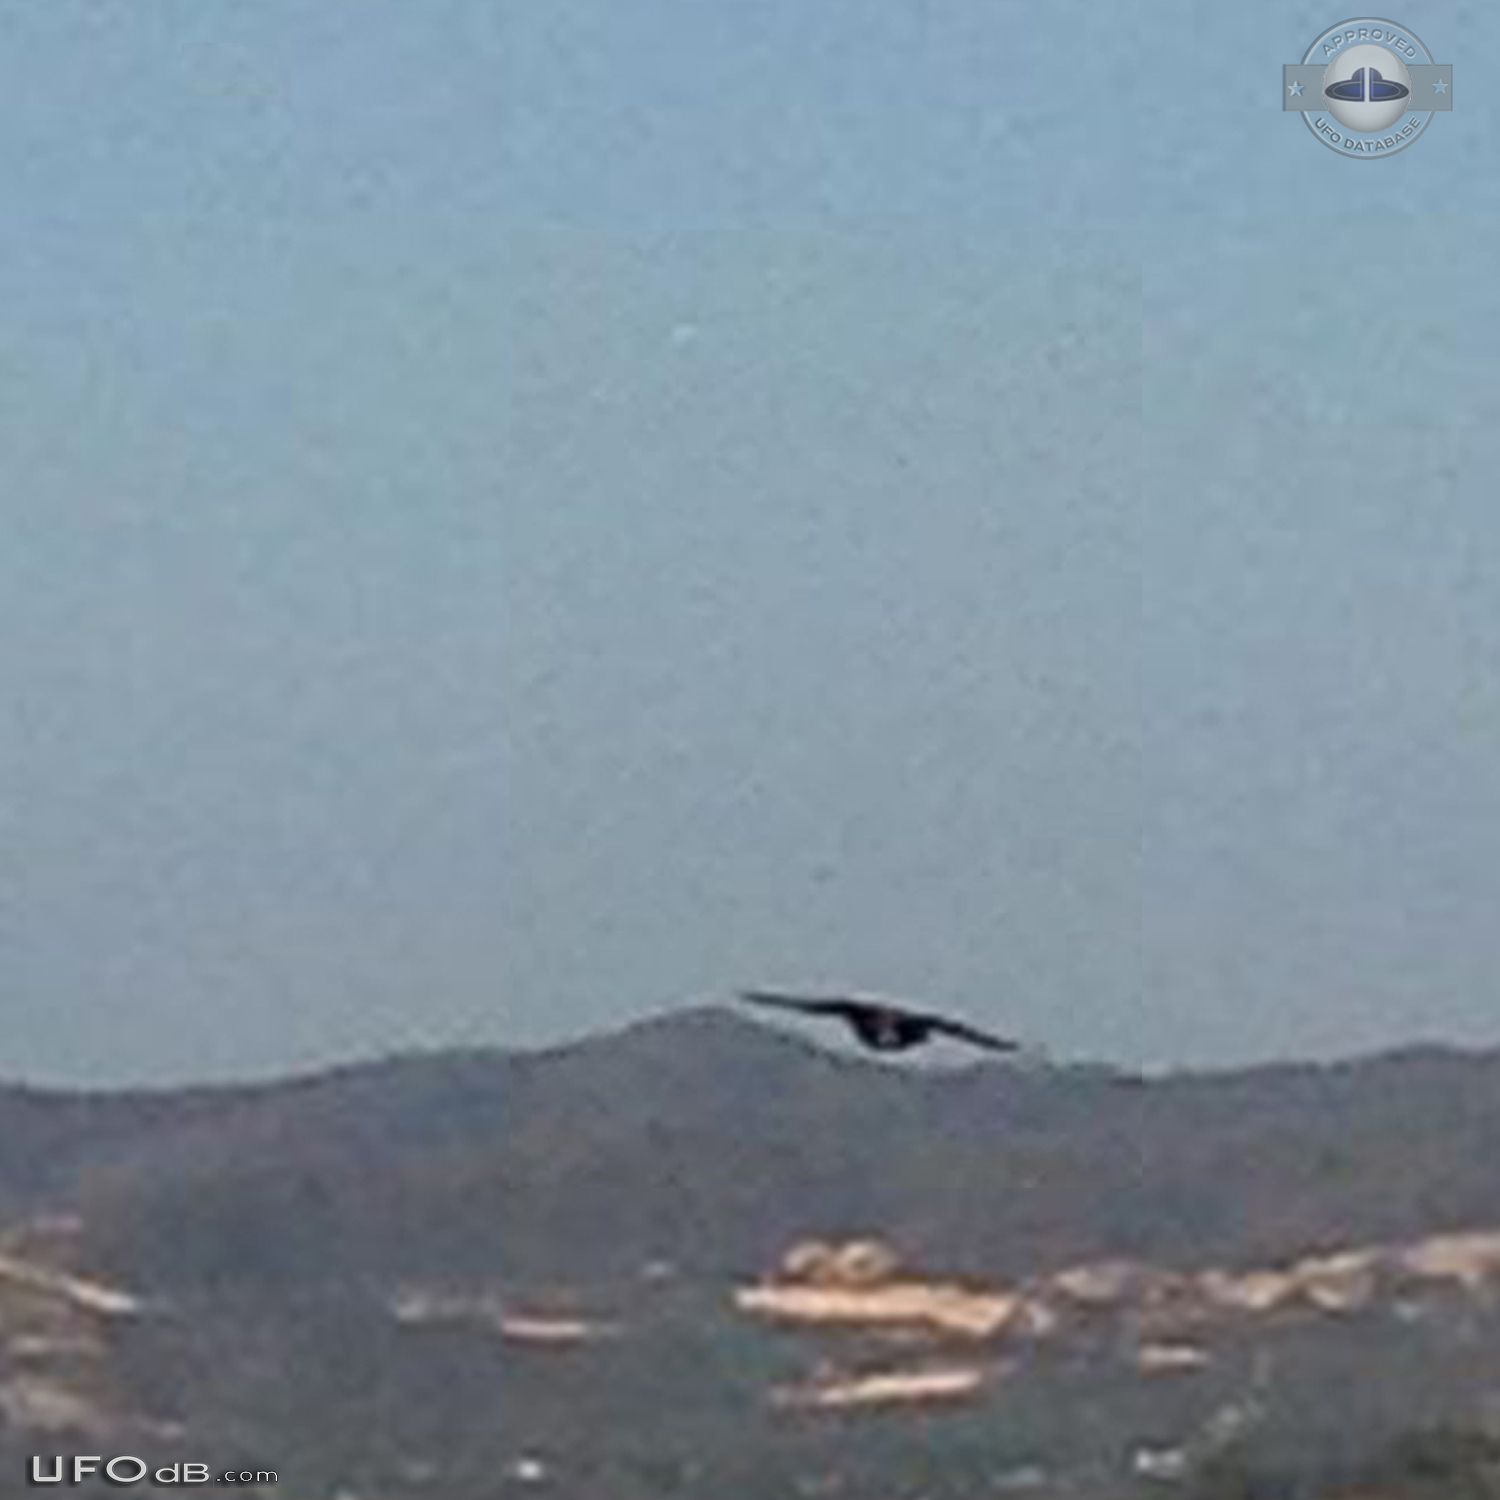 UFO is stationary above a walmart over Ponce in Puerto Rico March 2015 UFO Picture #667-3